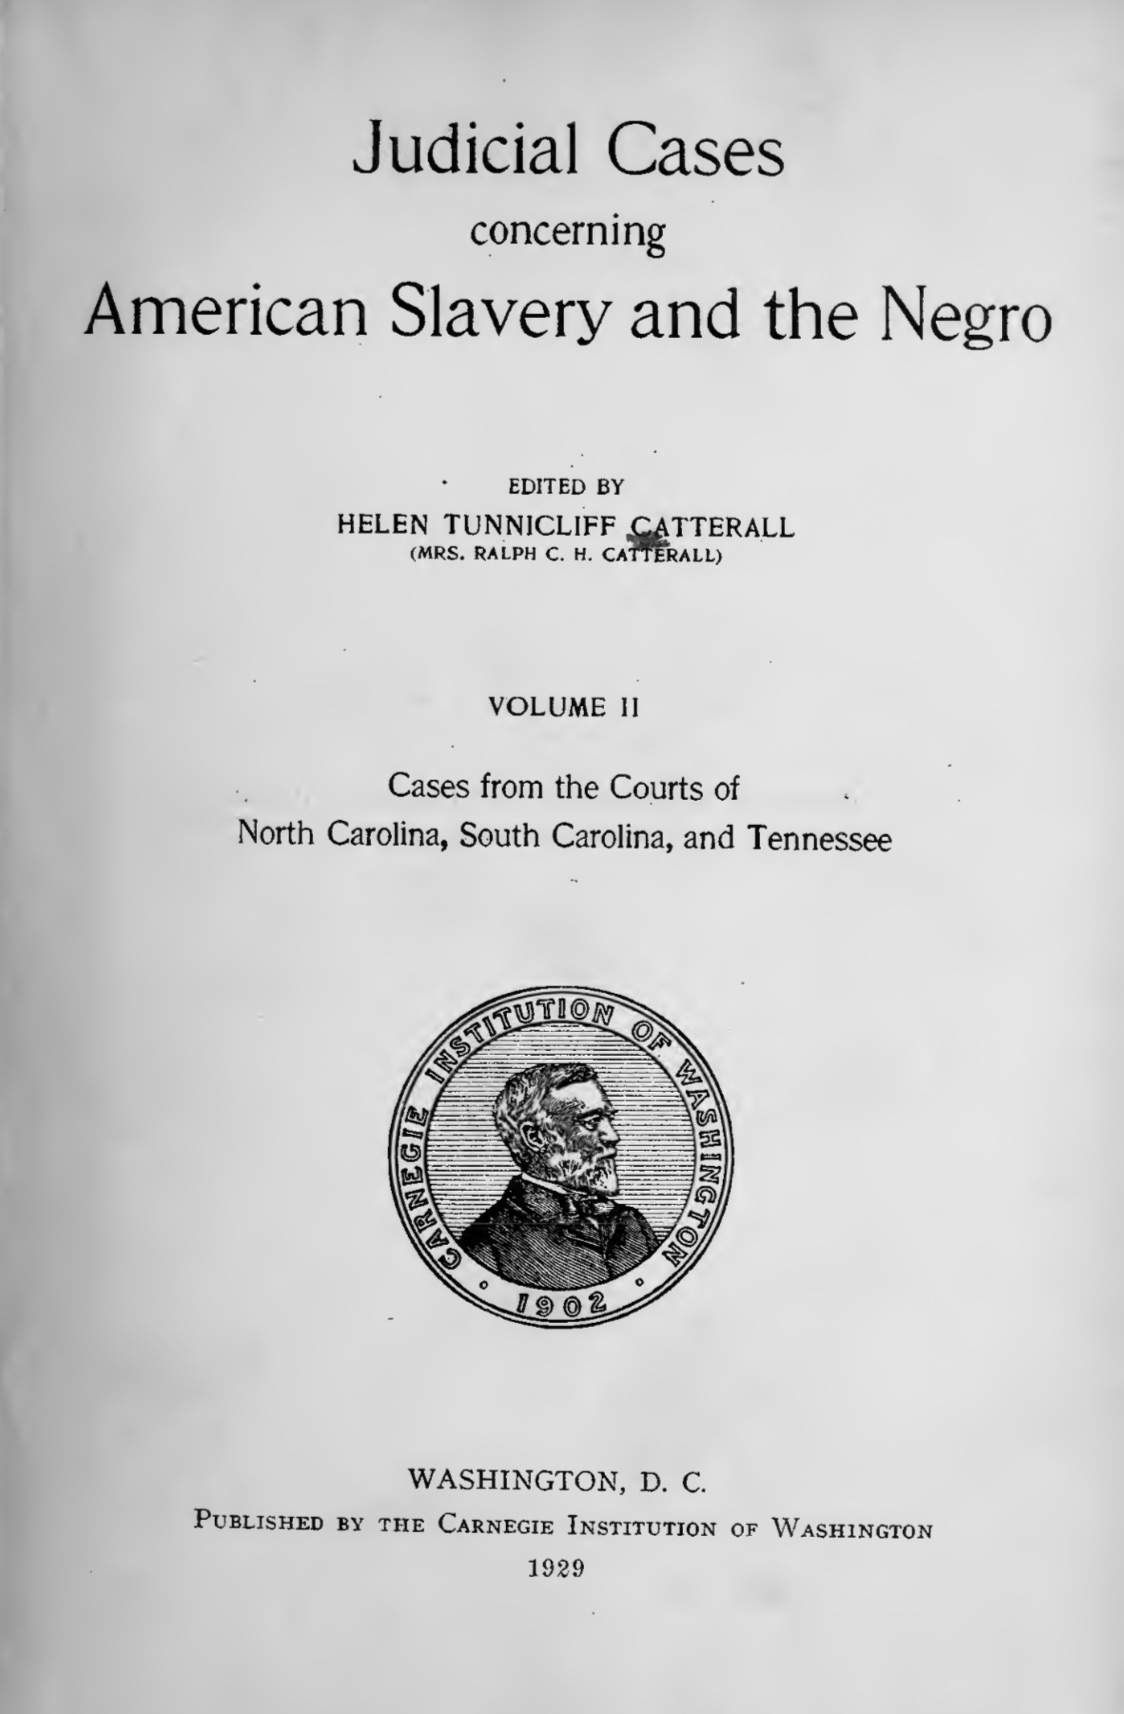 Judicial cases concerning American slavery and the Negro - Volume II Cover